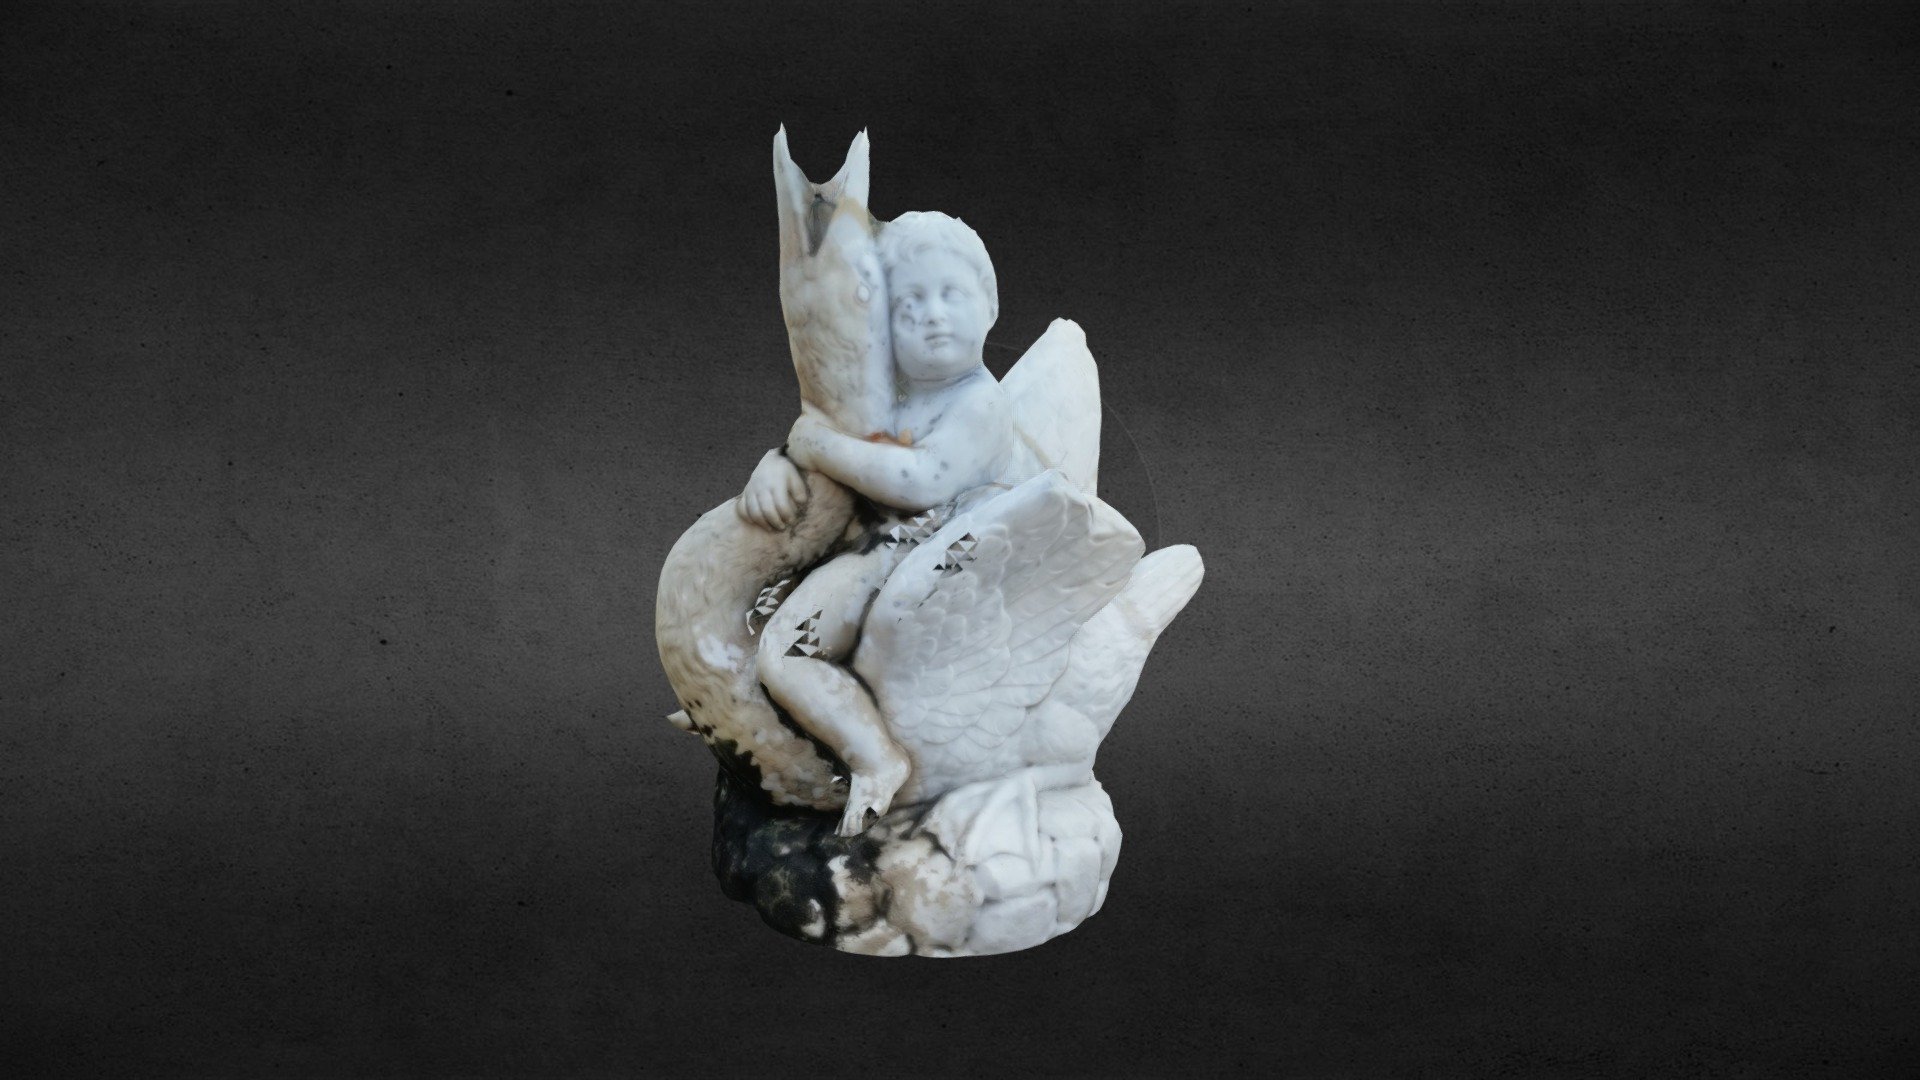 The boy on the swan for the 3D modelling and Photogrammetry project 3d model